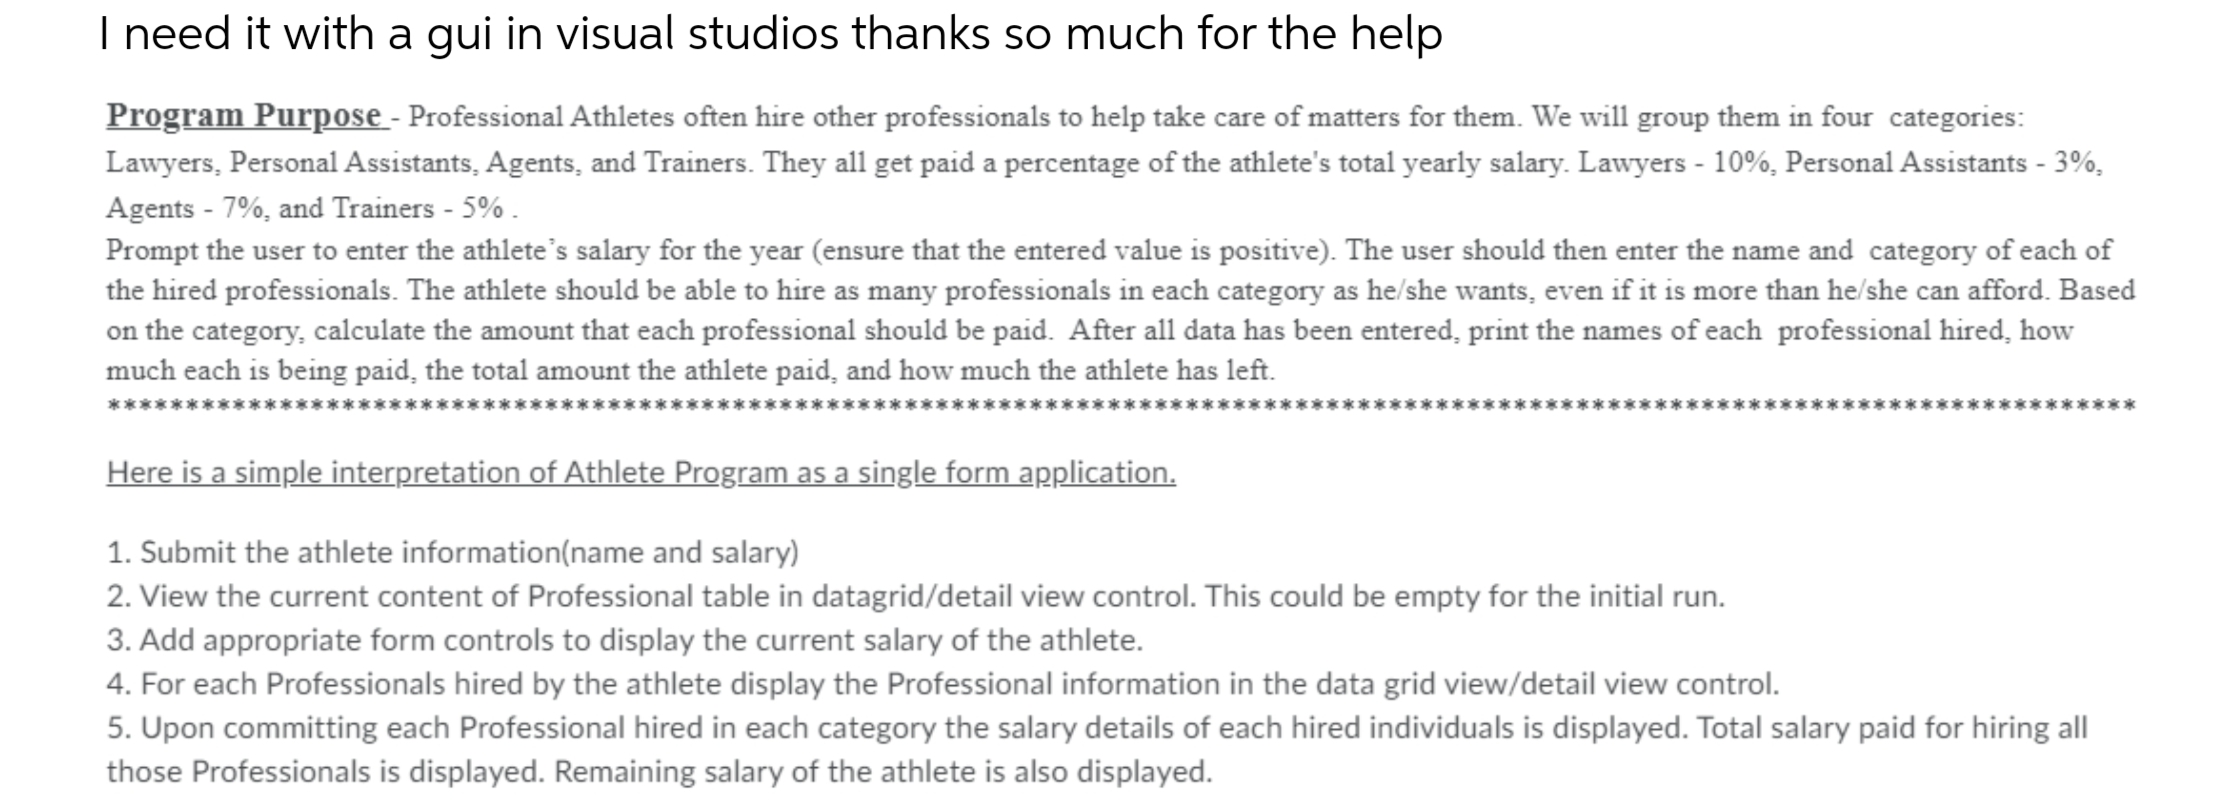 Program Purpose - Professional Athletes often hire other professionals to help take care of matters for them. We will group them in four categories:
Lawyers, Personal Assistants, Agents, and Trainers. They all get paid a percentage of the athlete's total yearly salary. Lawyers - 10%, Personal Assistants - 3%,
Agents - 7%, and Trainers - 5% .
Prompt the user to enter the athlete's salary for the year (ensure that the entered value is positive). The user should then enter the name and category of each of
the hired professionals. The athlete should be able to hire as many professionals in each category as he/she wants, even if it is more than he/she can afford. Based
on the category, calculate the amount that each professional should be paid. After all data has been entered, print the names of each professional hired, how
much each is being paid, the total amount the athlete paid, and how much the athlete has left.
